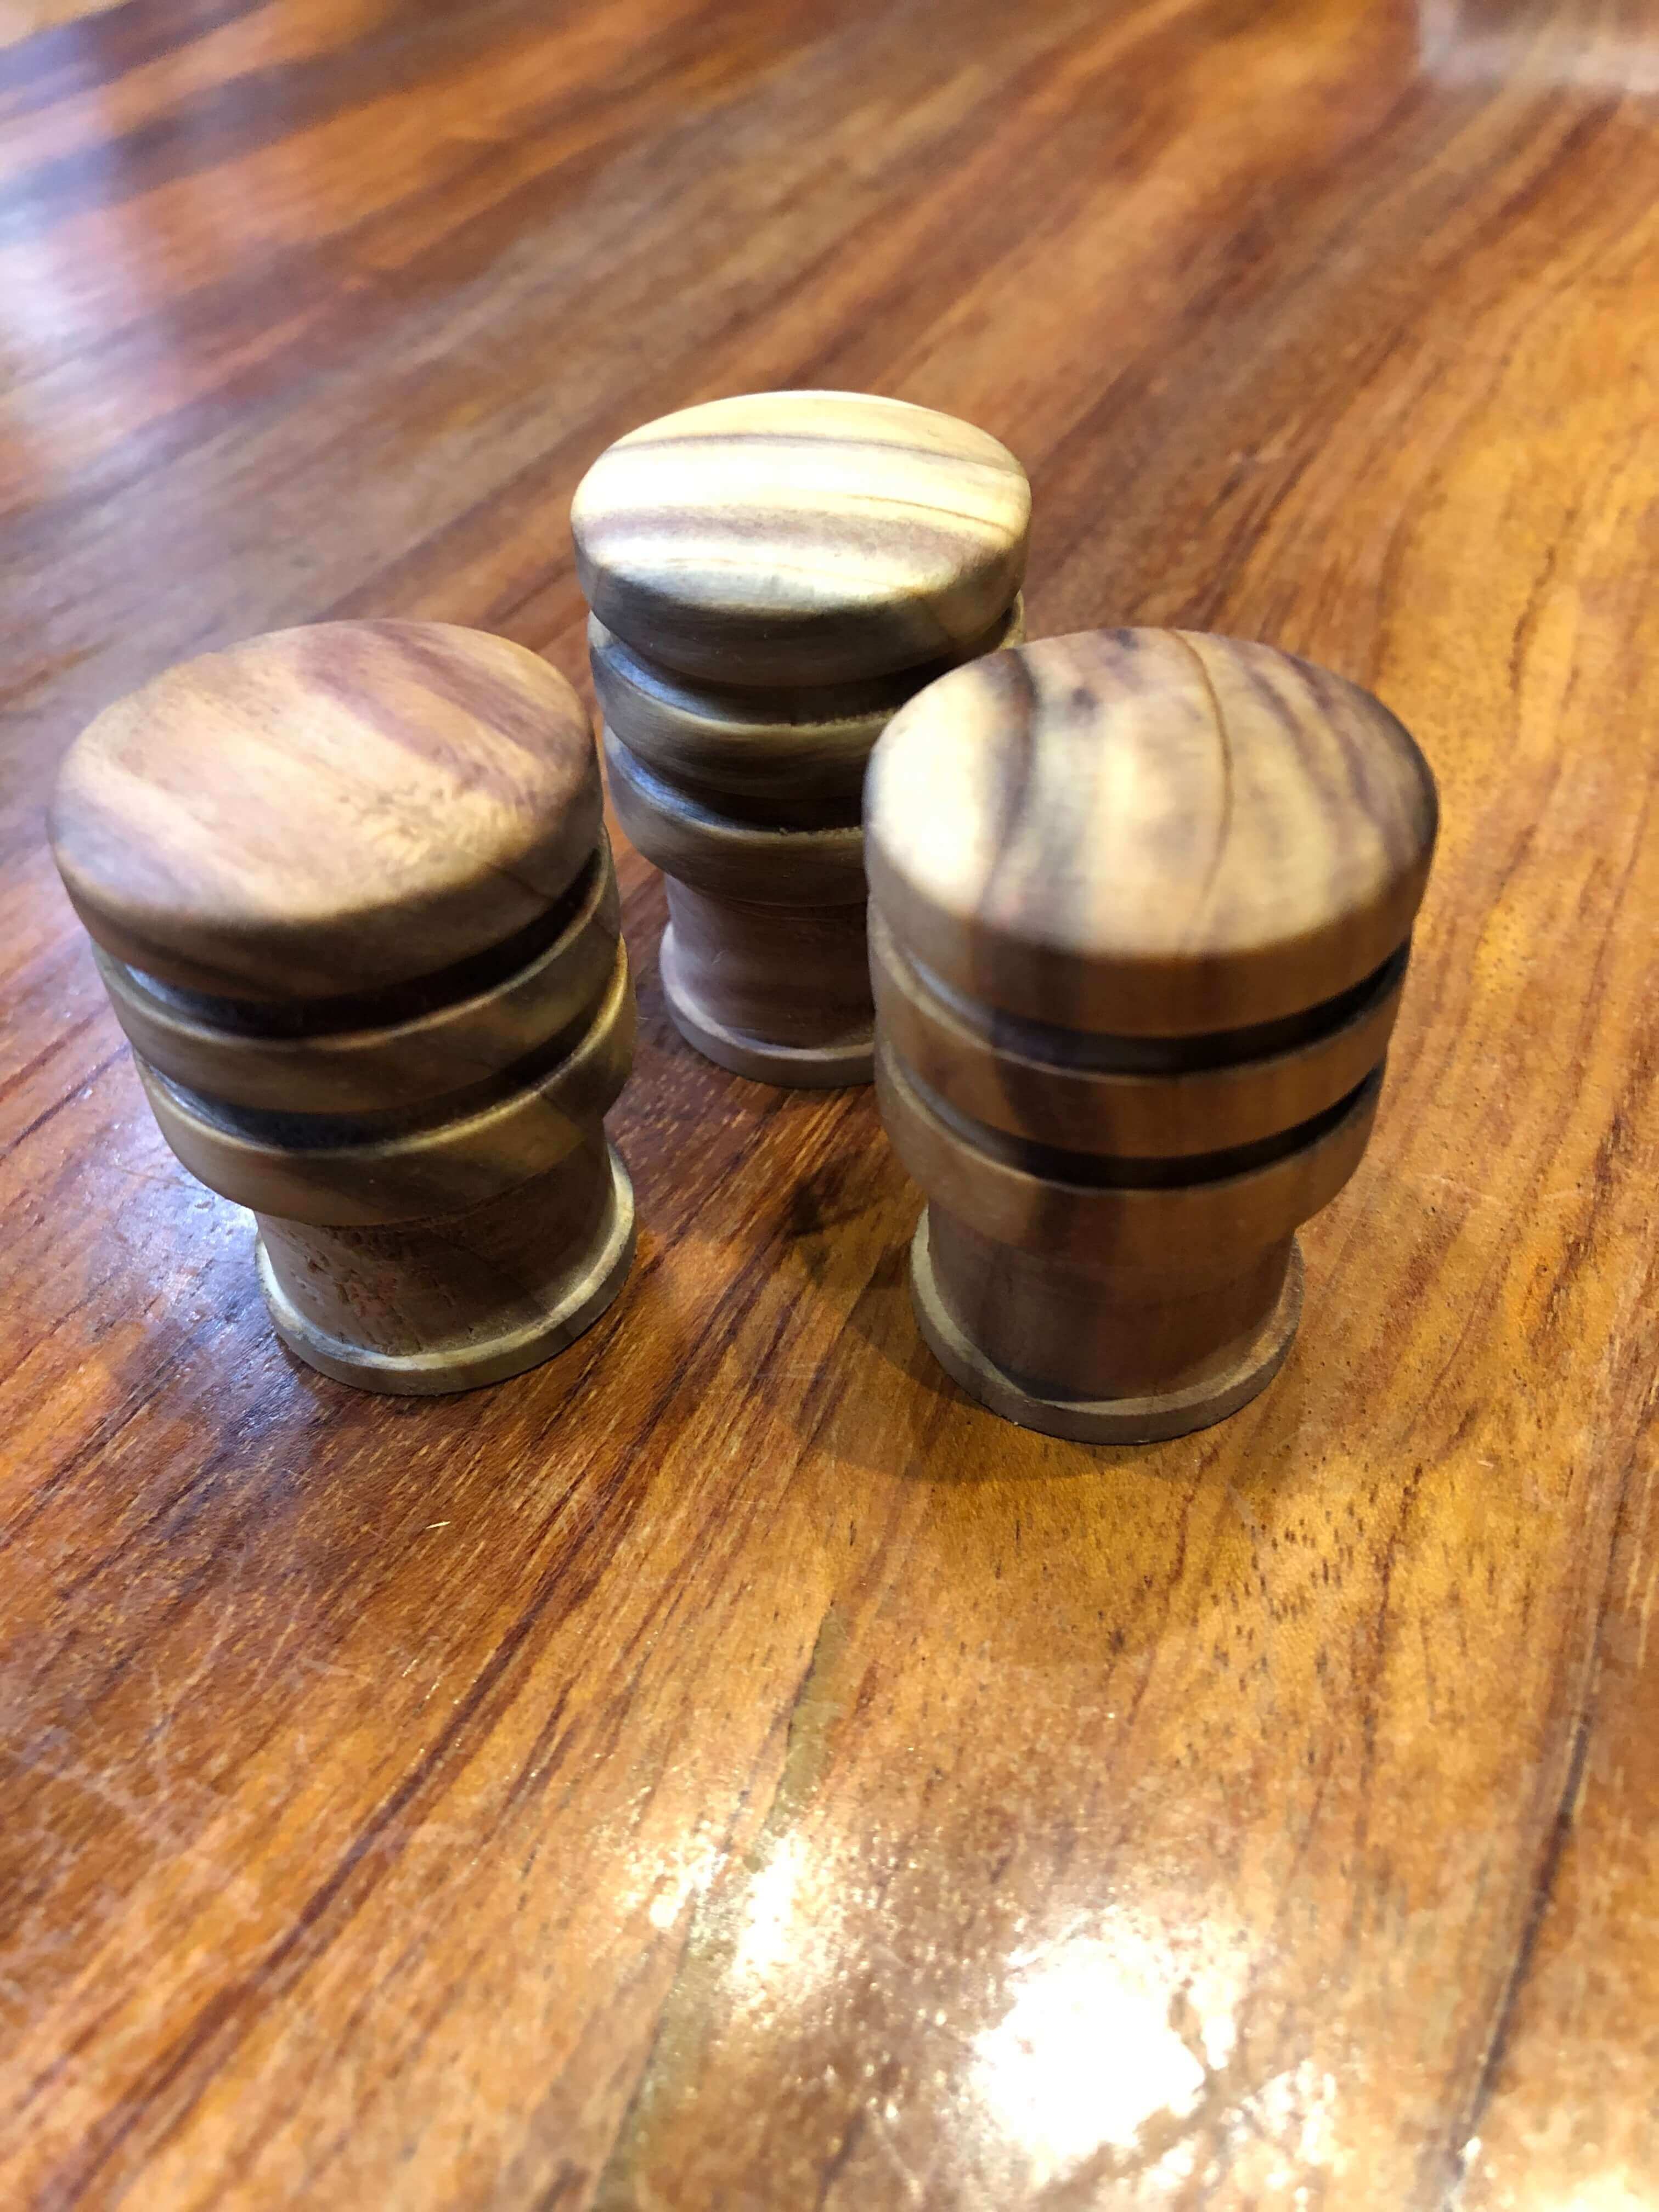 Accessories wood